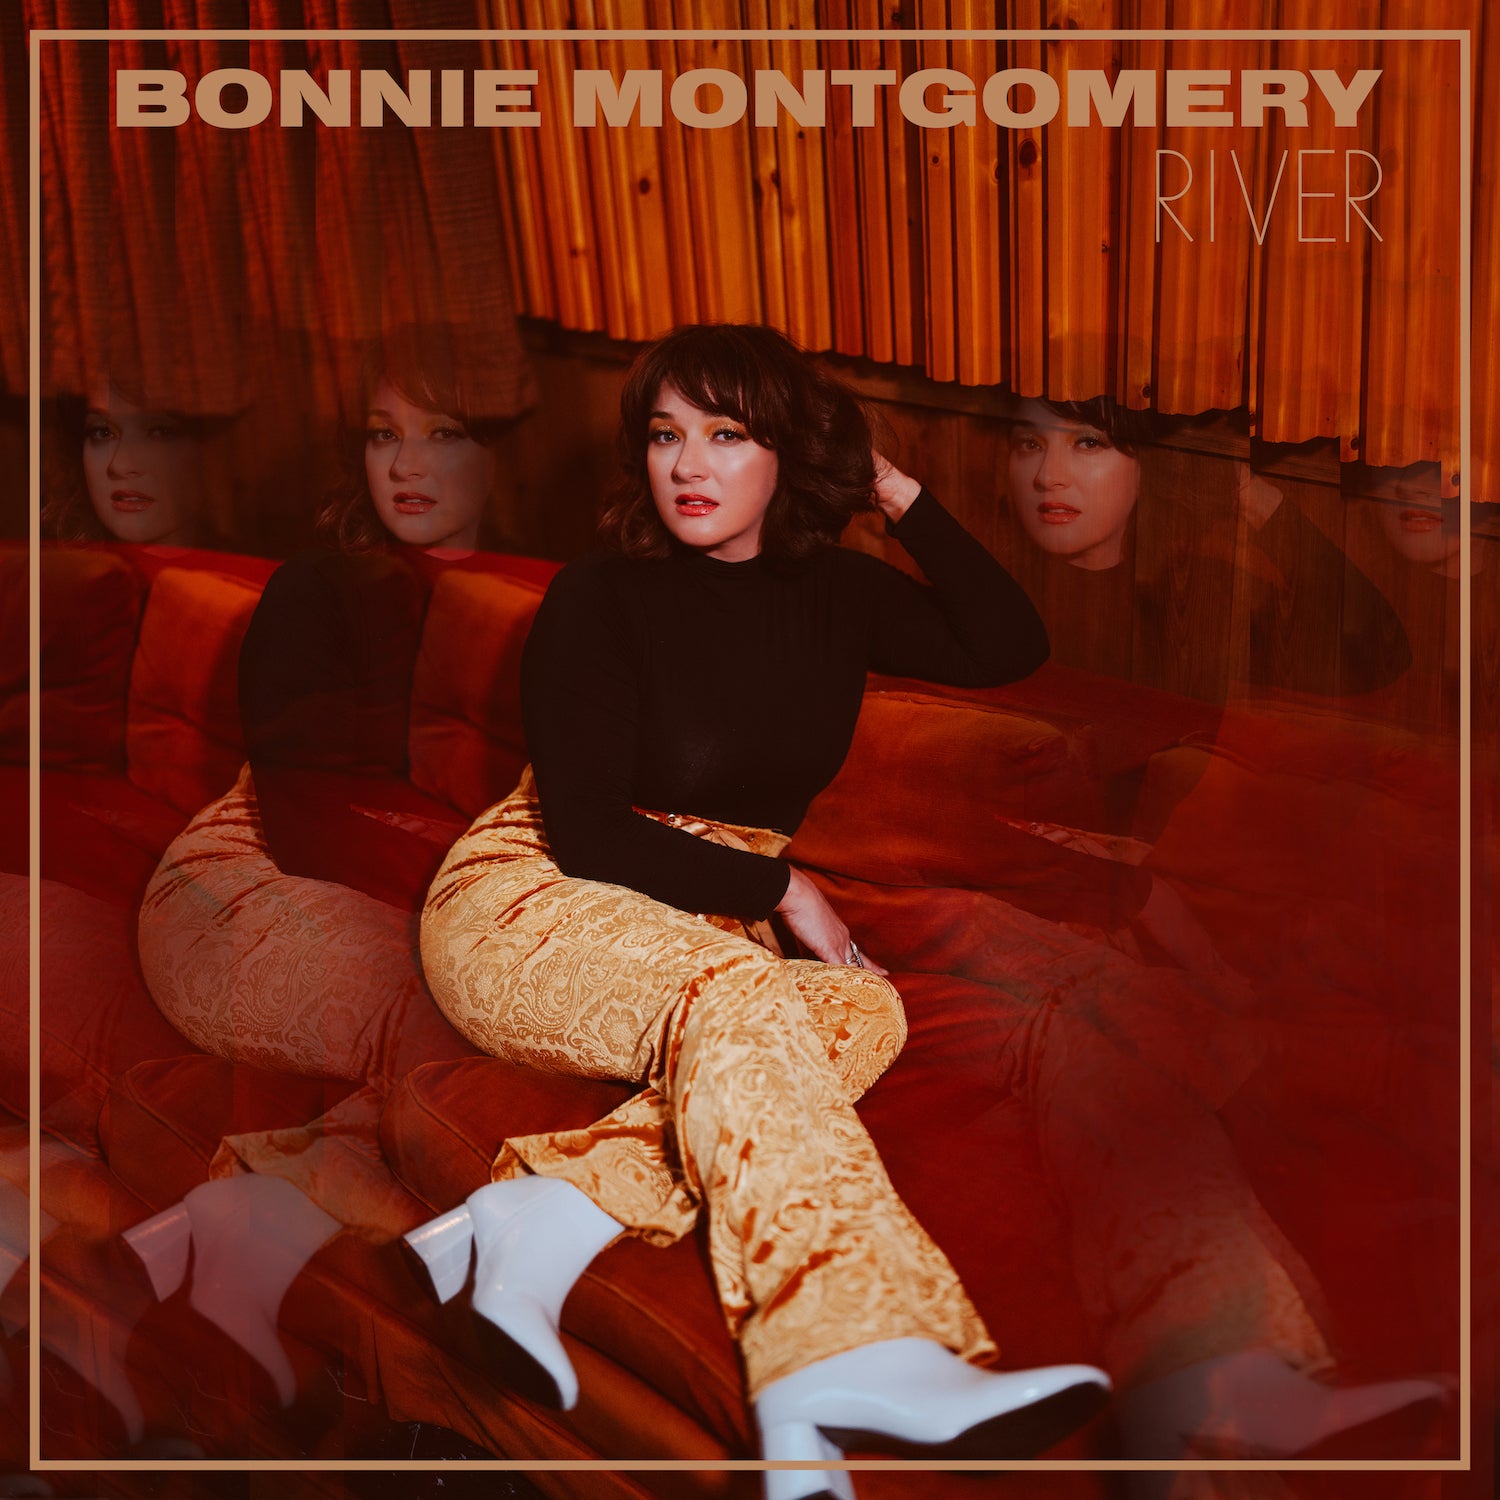 Announcing: Bonnie Montgomery - "River" (our 11.3)